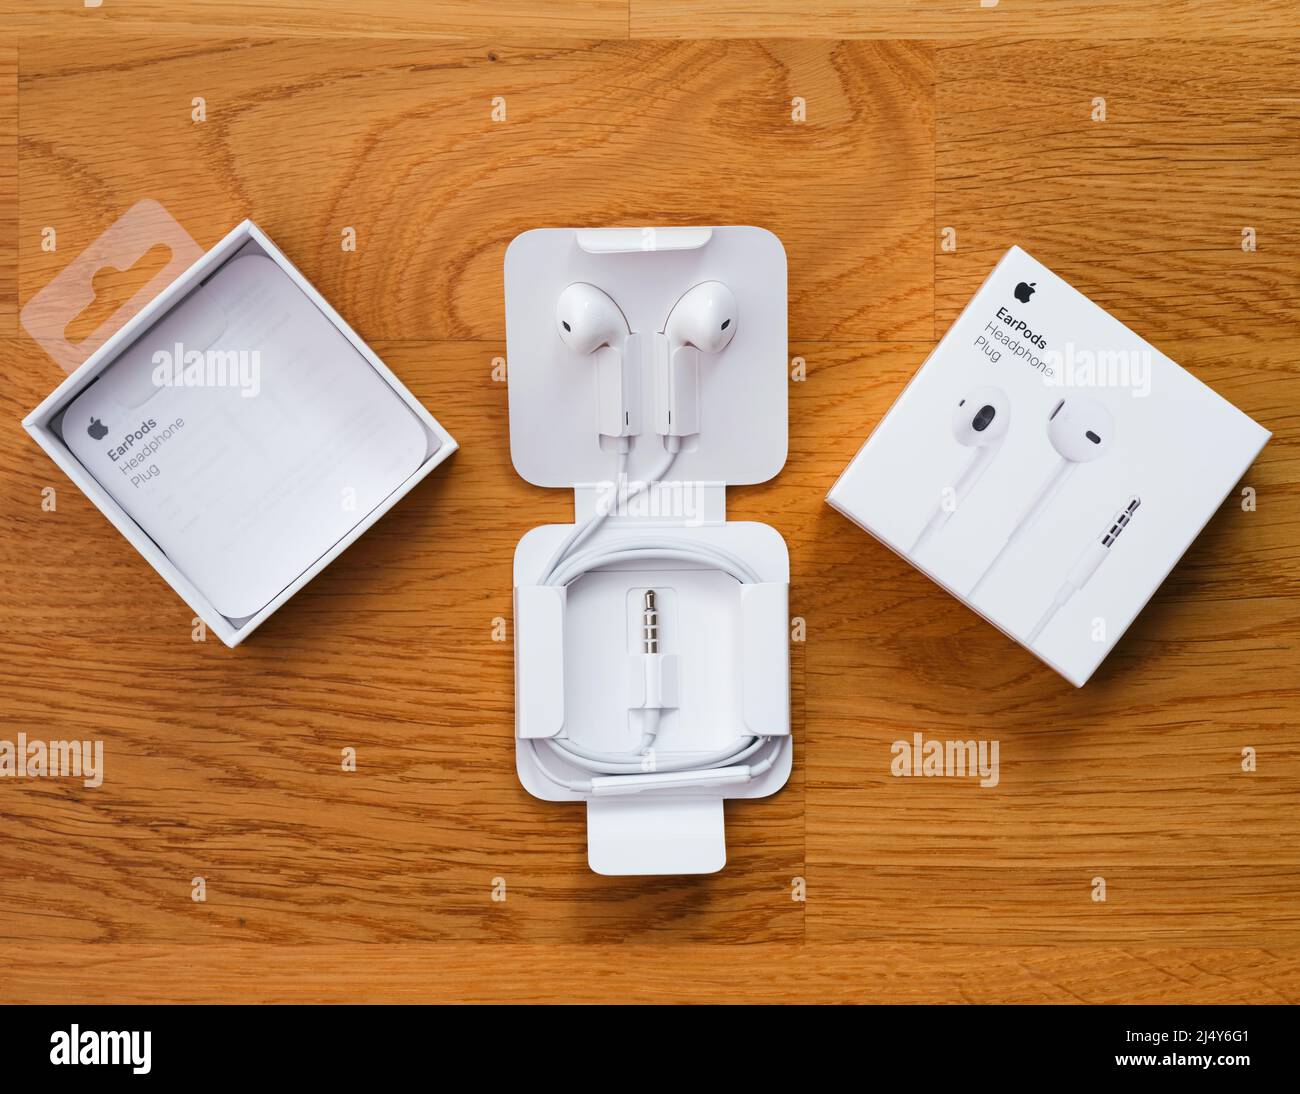 Tambov, Russian Federation - December 14, 2021 A New Apple EarPods unboxed on a wooden background Stock Photo